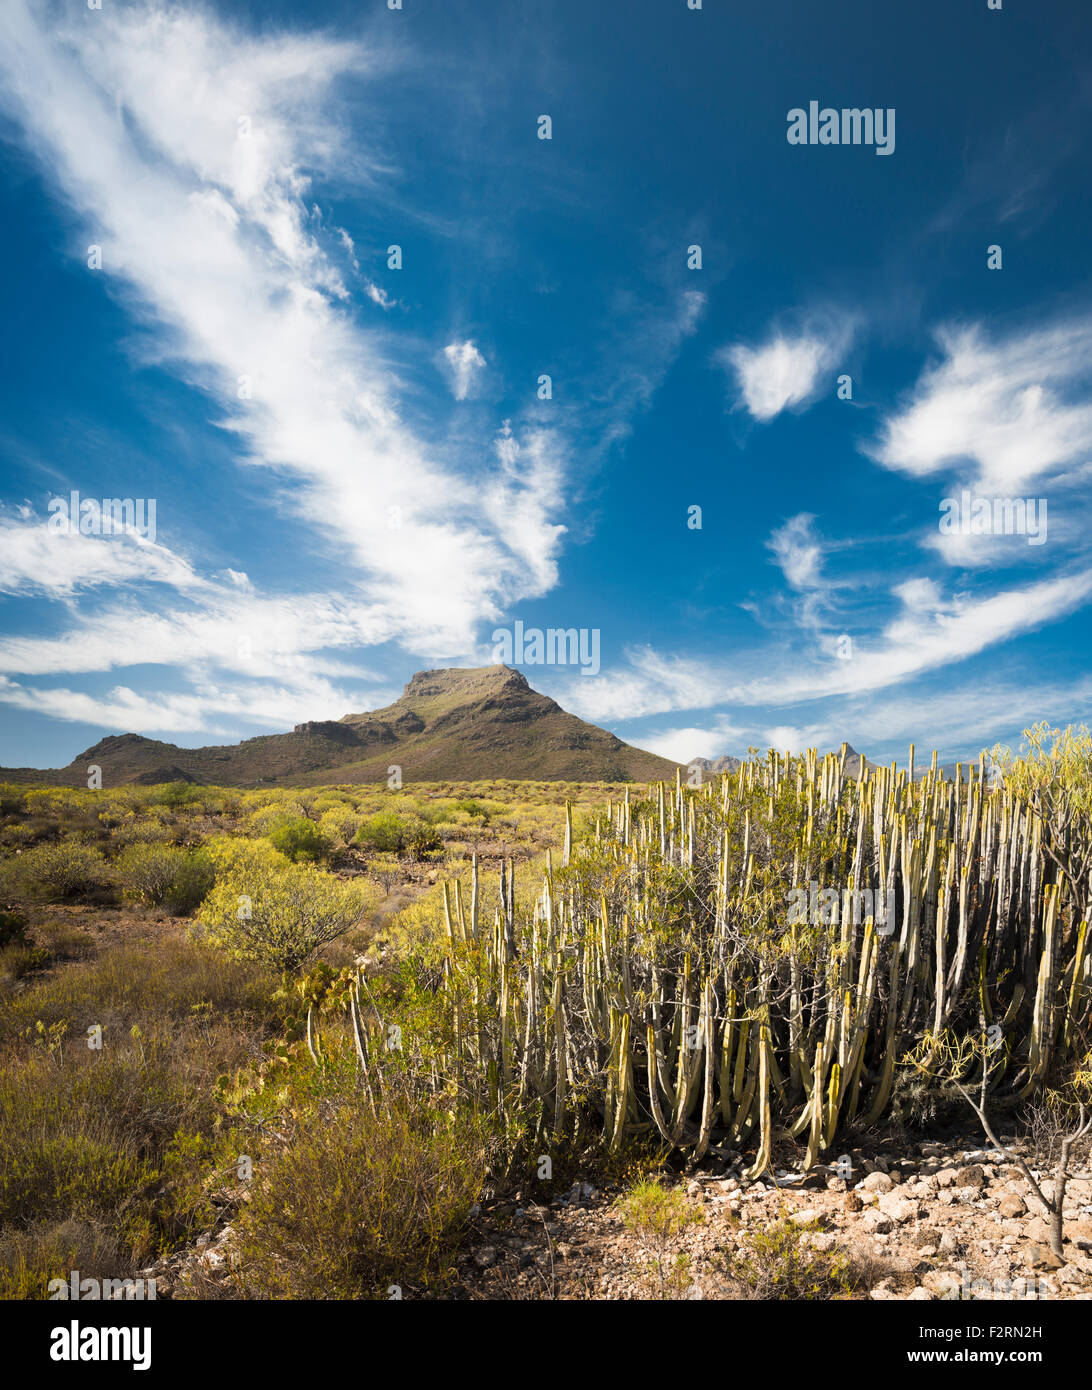 The iconic mountain of Roque del Conde in southern Tenerife, with typical flora of this semi-arid region in the foreground Stock Photo